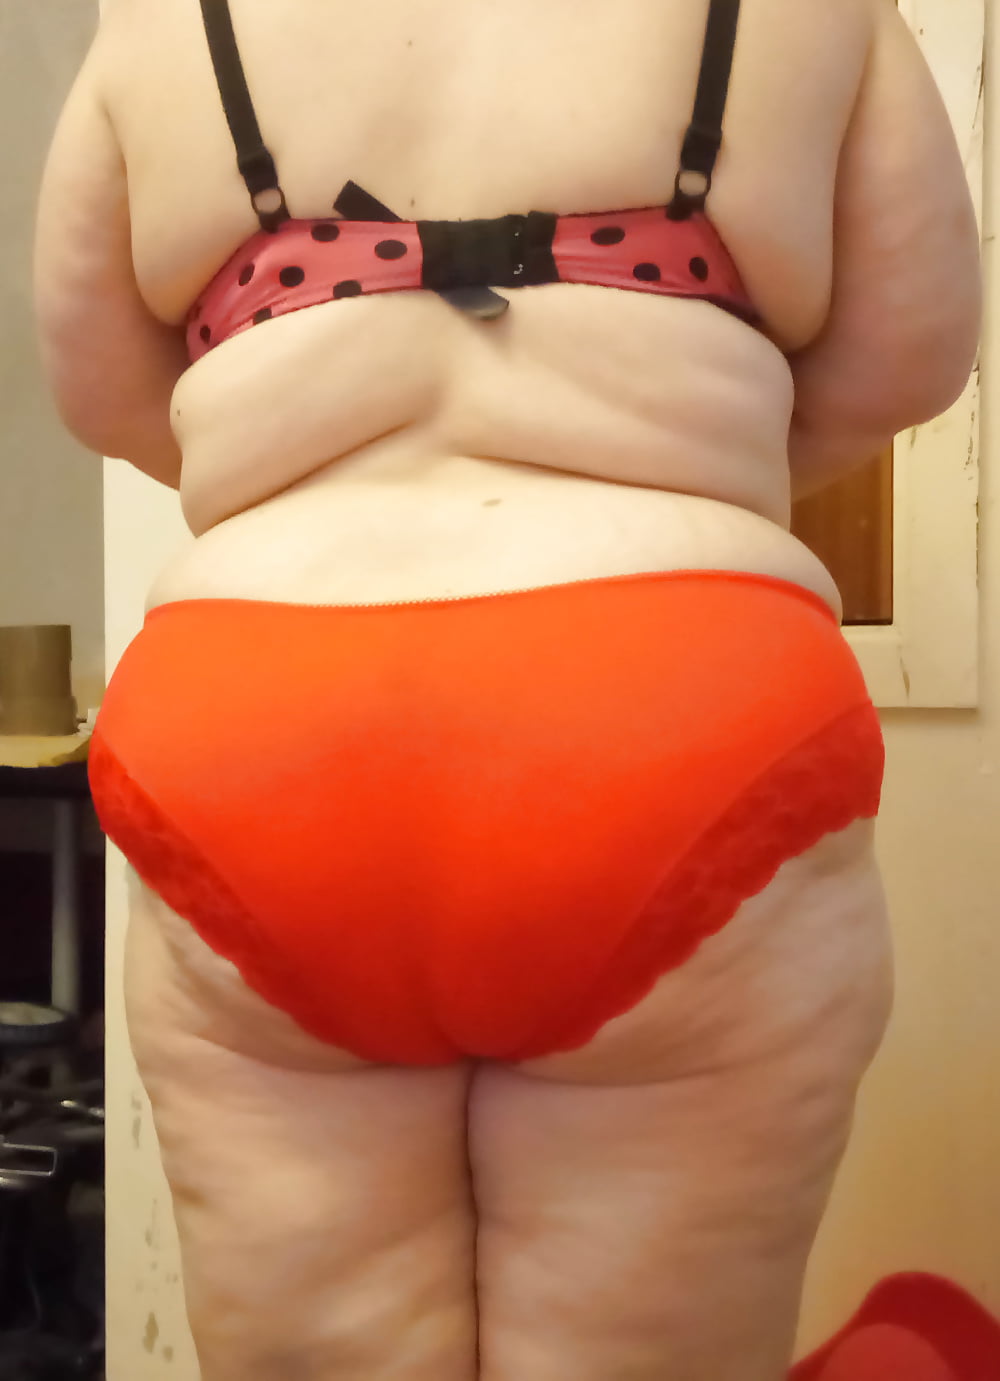 BBW Wife trying on knickers _panties_ before first threesome (8/10)